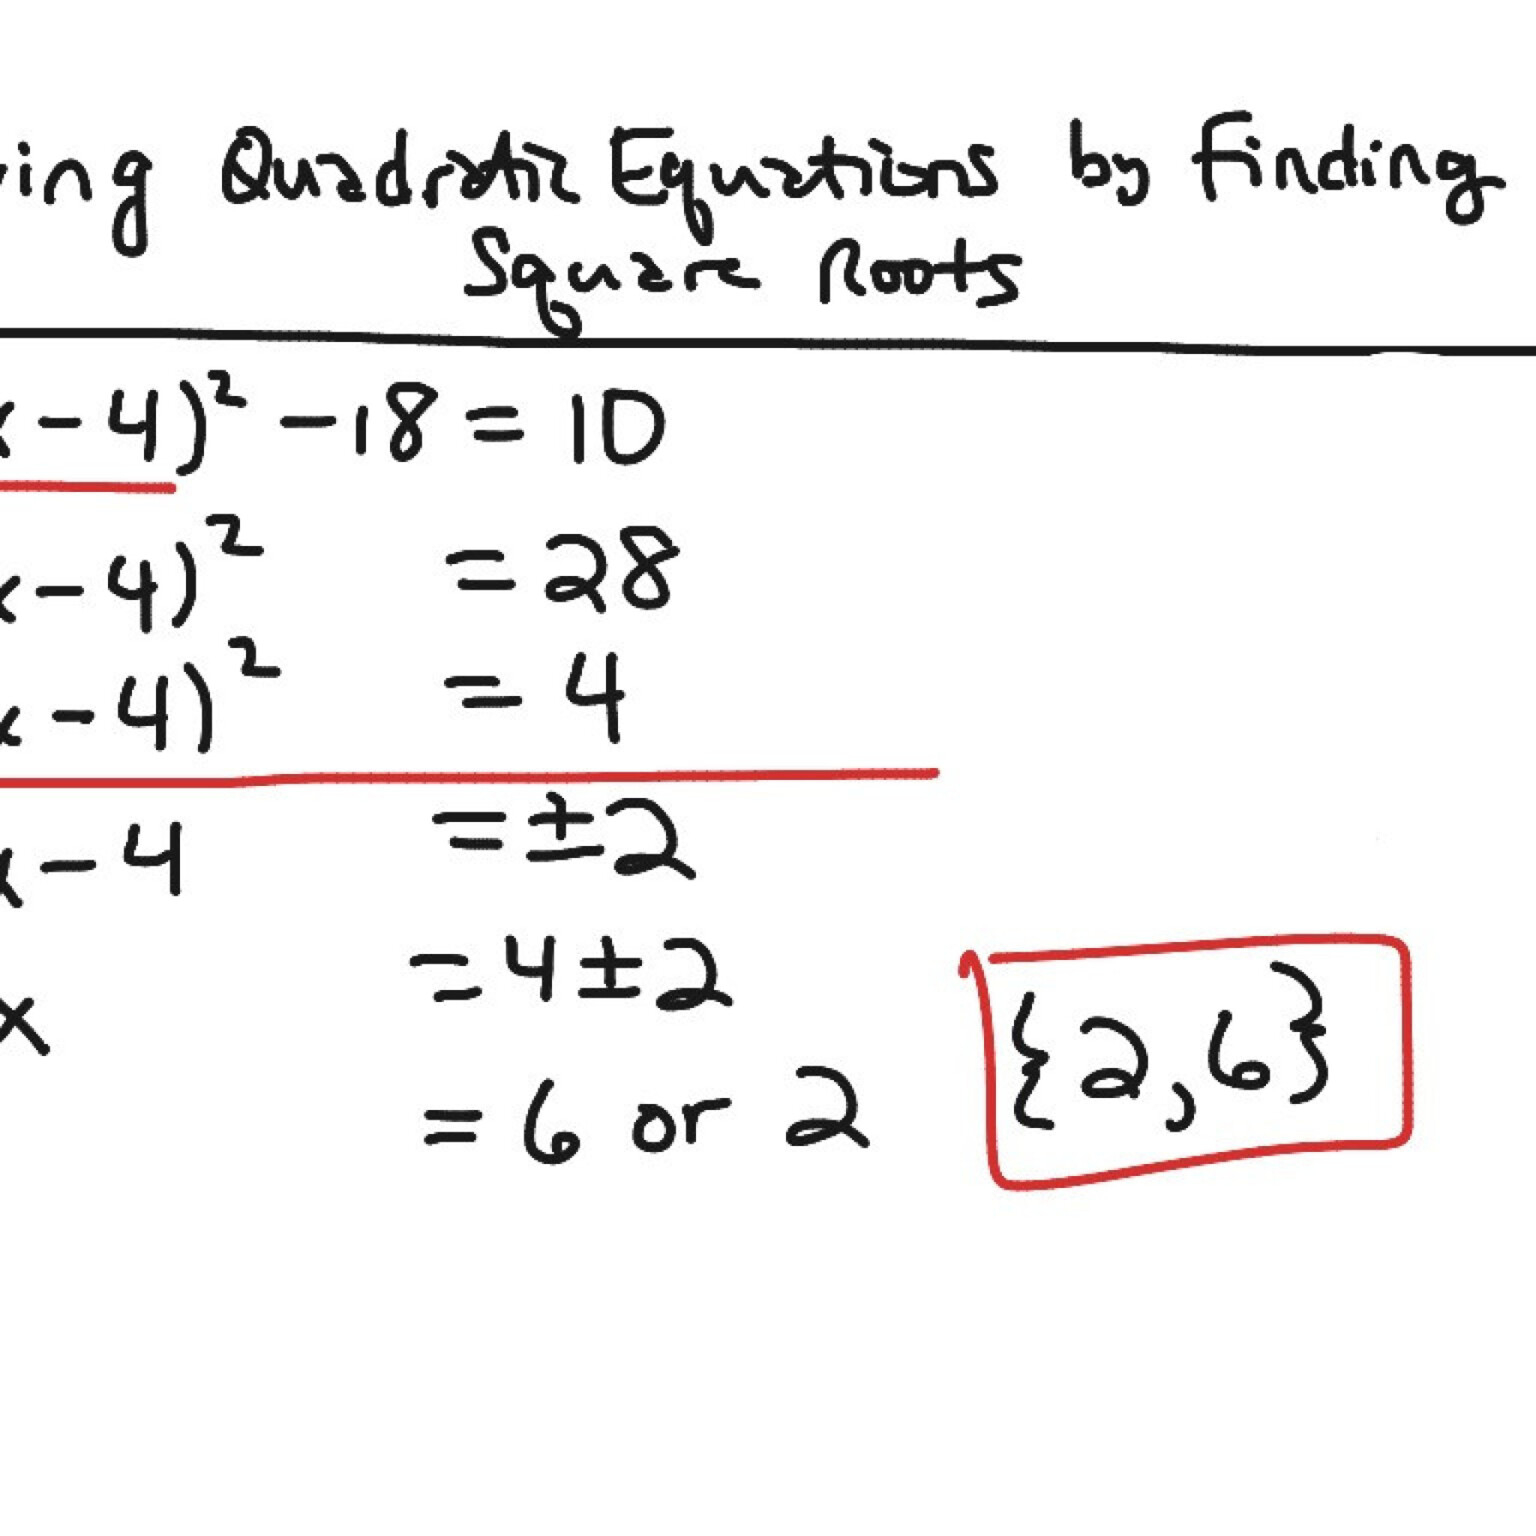 Solving Quadratic Equations By Extracting Square Roots Worksheet